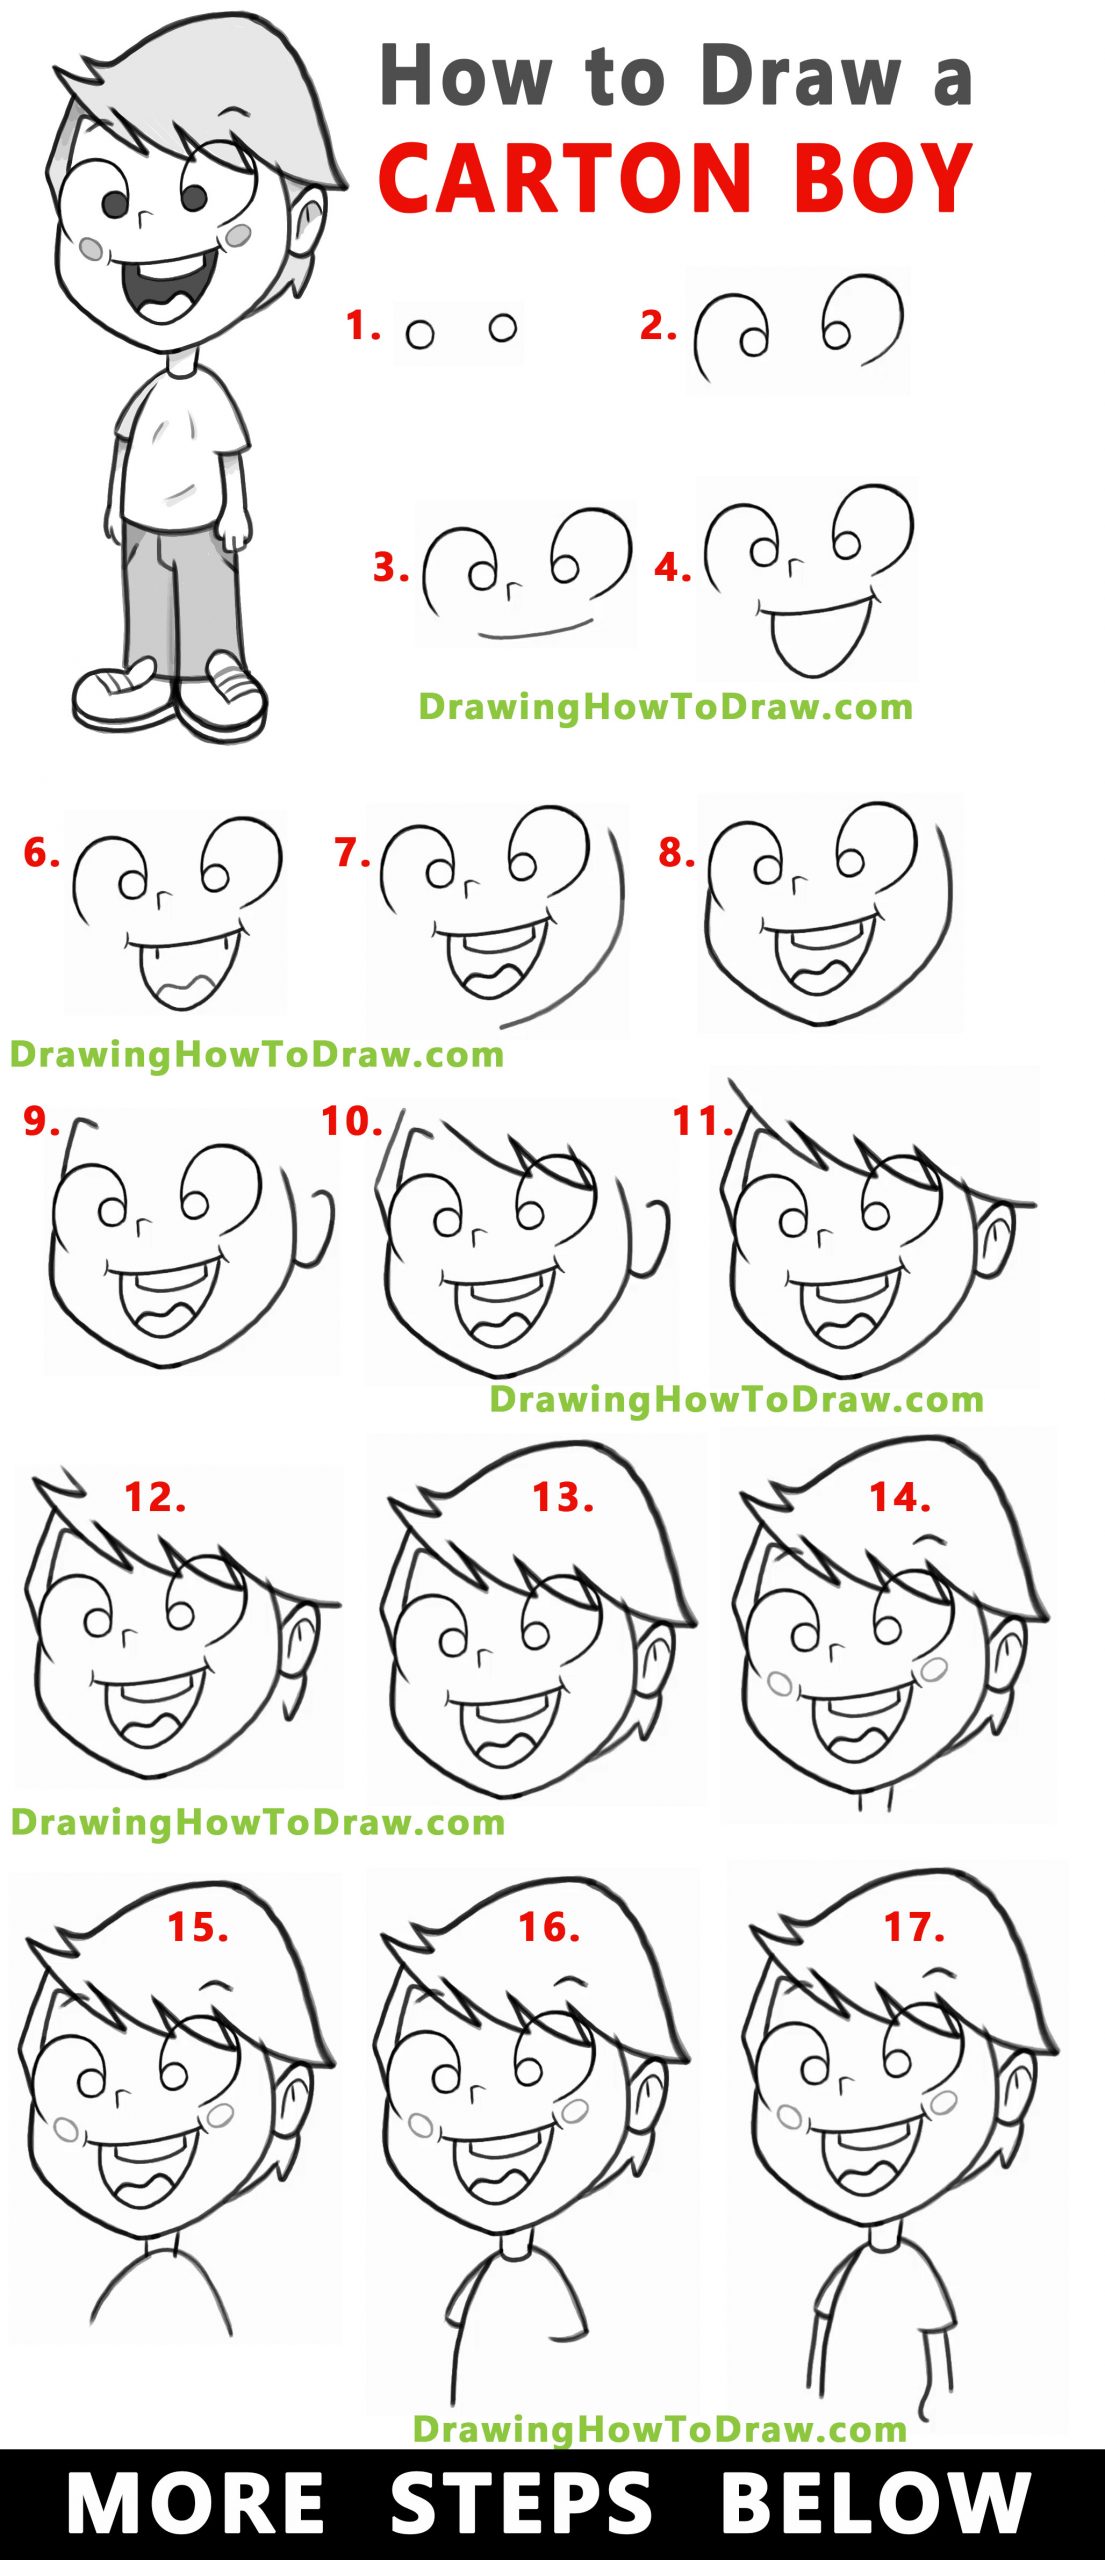 How to Draw Cute Cartoon Popsicle with a Face Step-by-step